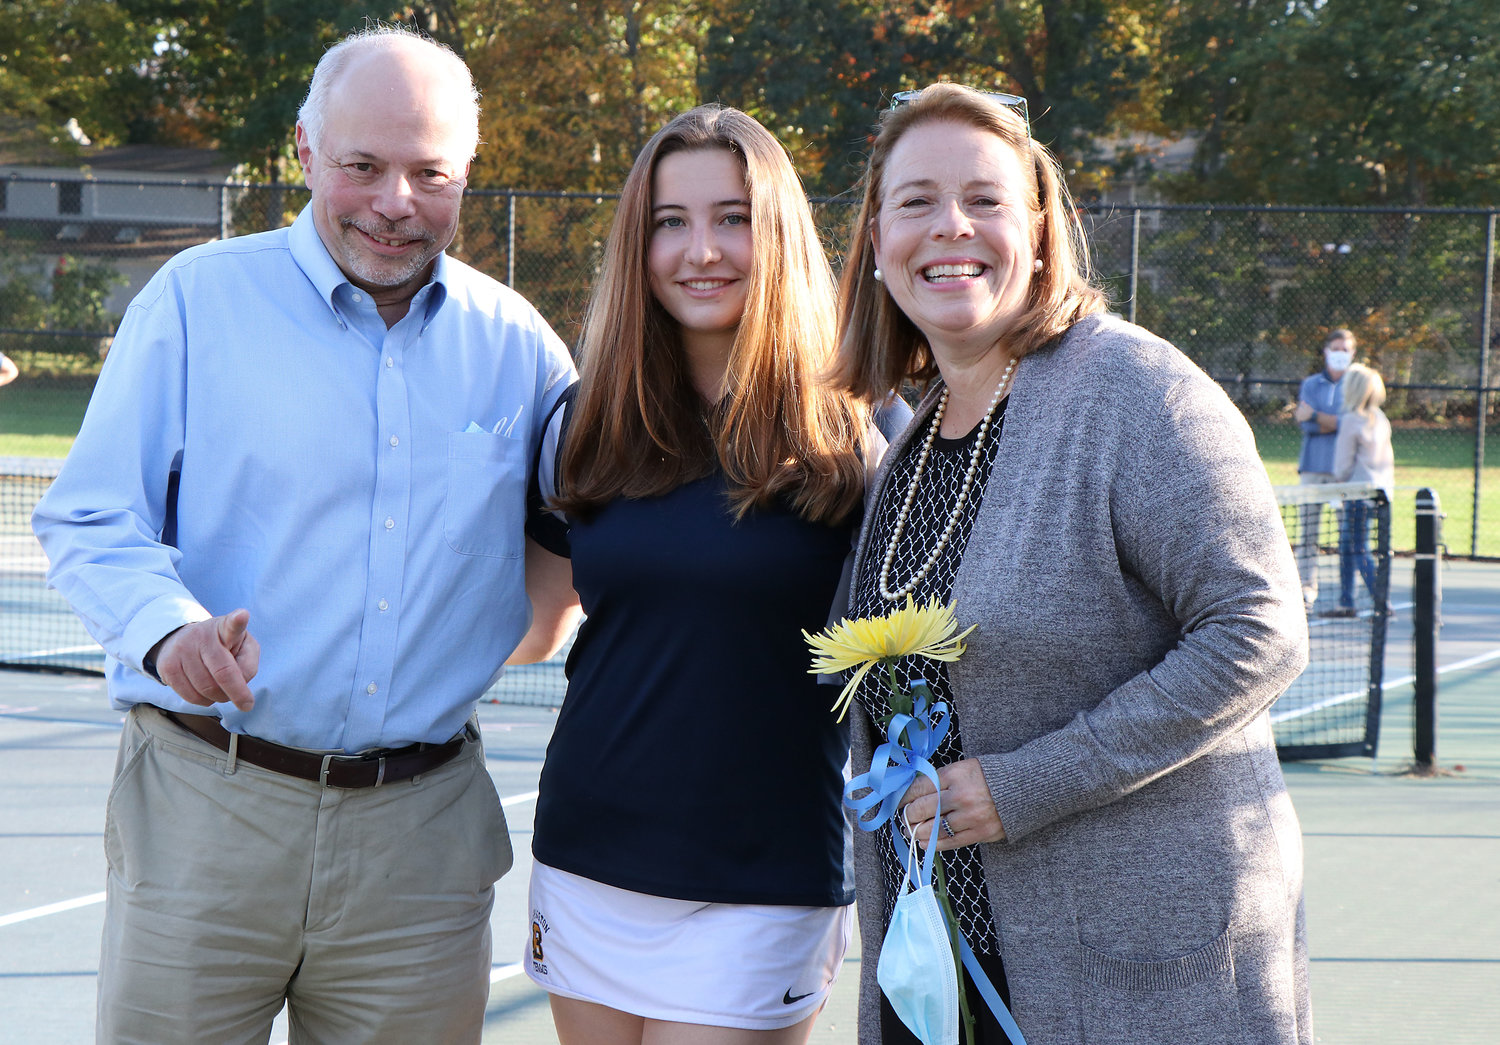 Alison Kostas brings a flower and poses with parents Jude and Susan Kostas during a short senior ceremony at the courts on Friday afternoon.